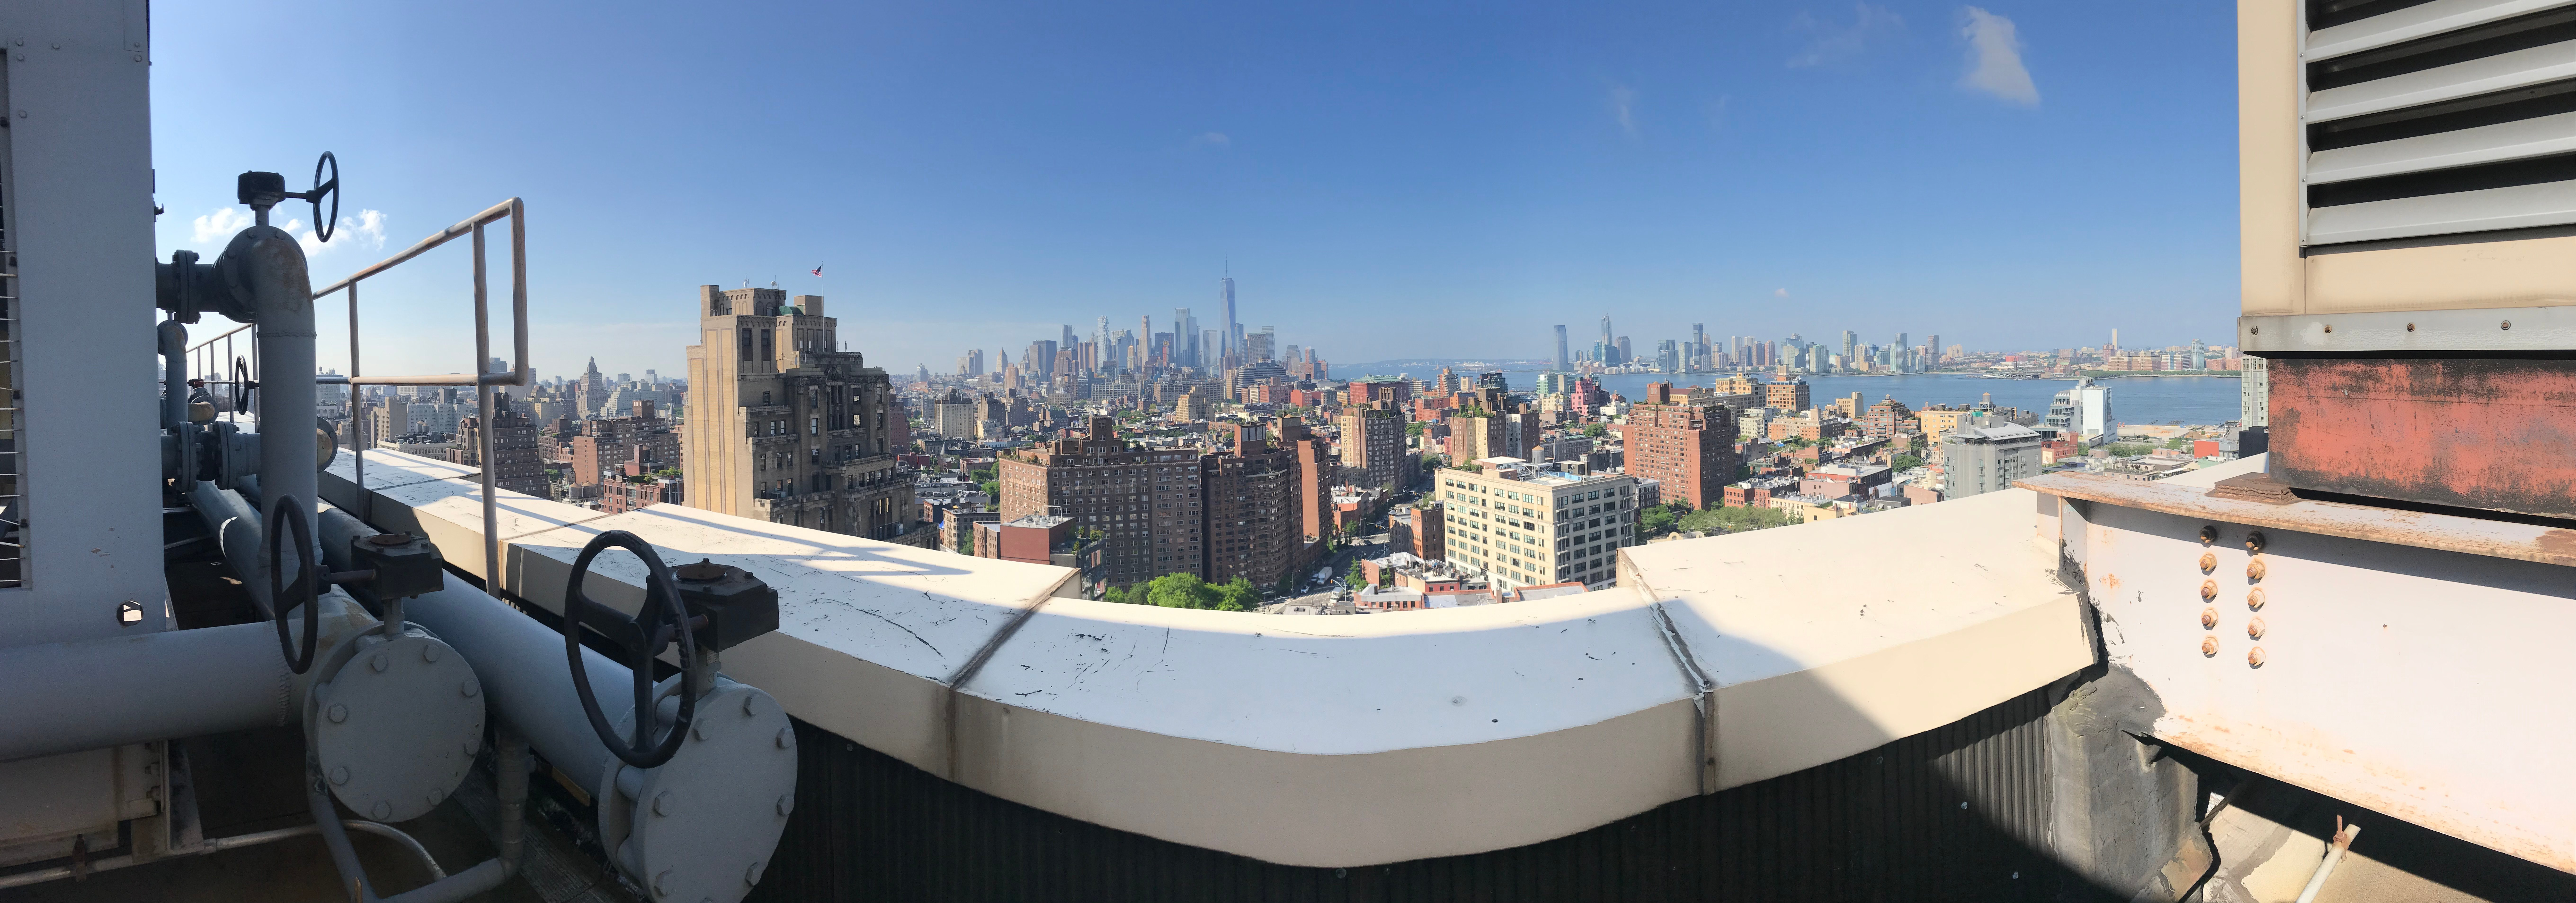 Example of a data center rooftop project in NYC